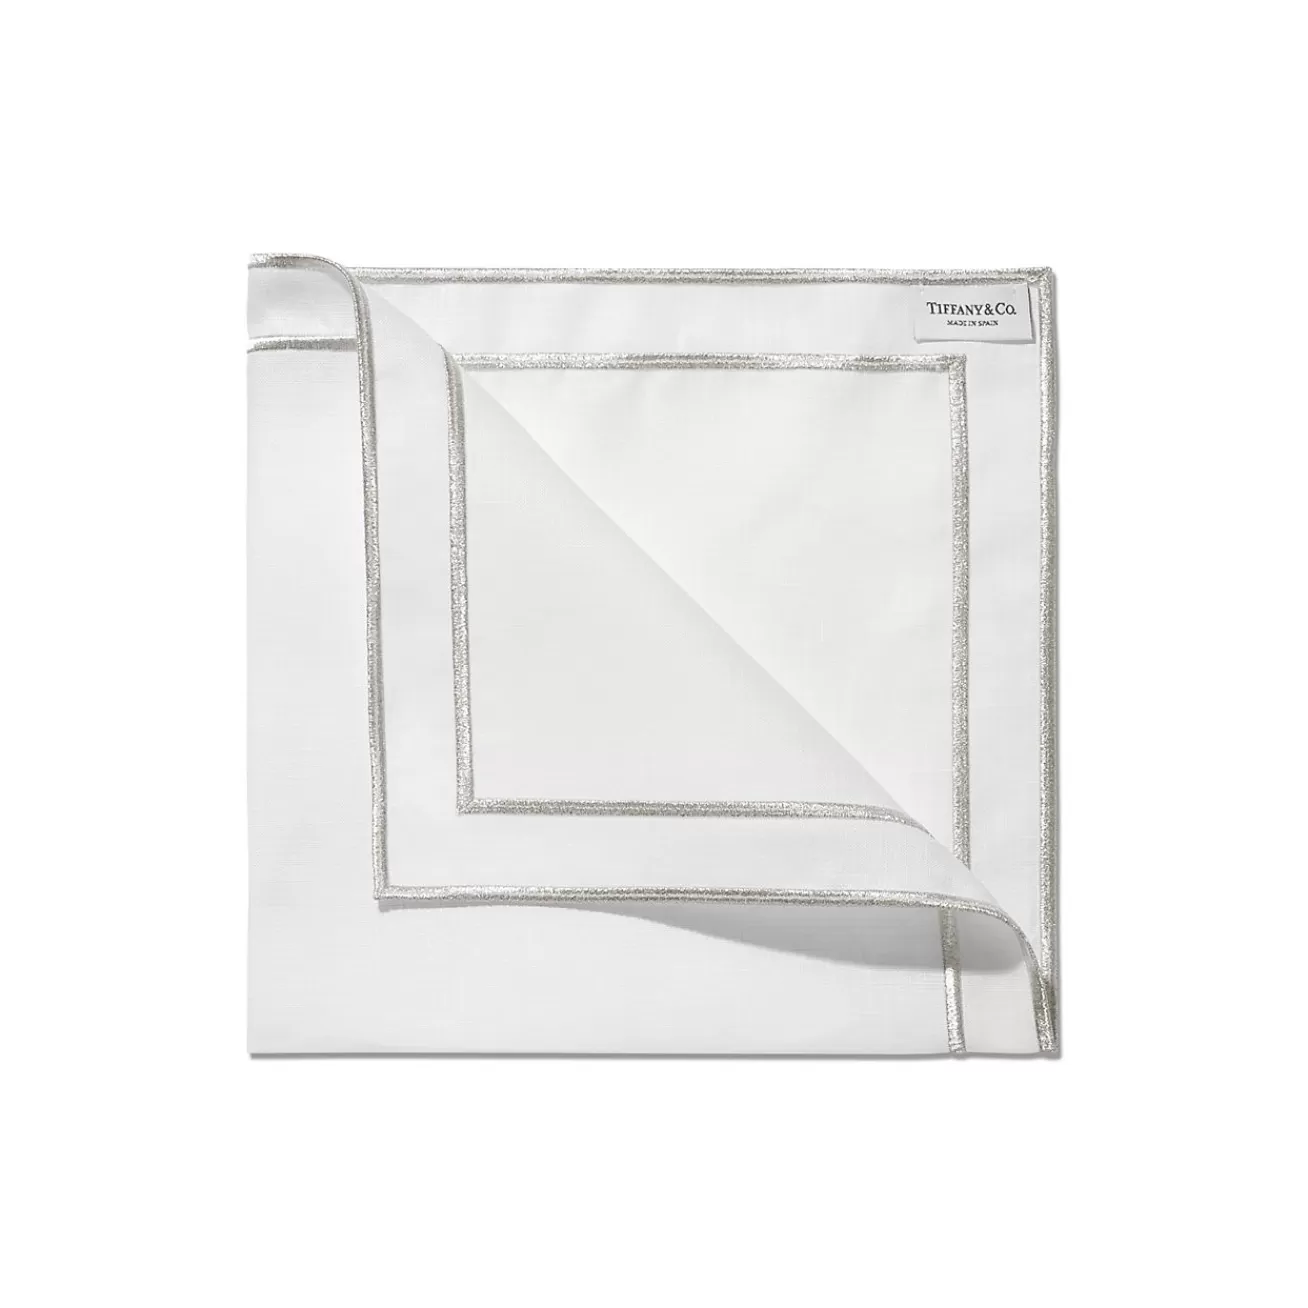 Tiffany & Co. Tiffany Home Essentials Embroidered Napkins in Linen, Set of Four | ^ Decor | Table Linens